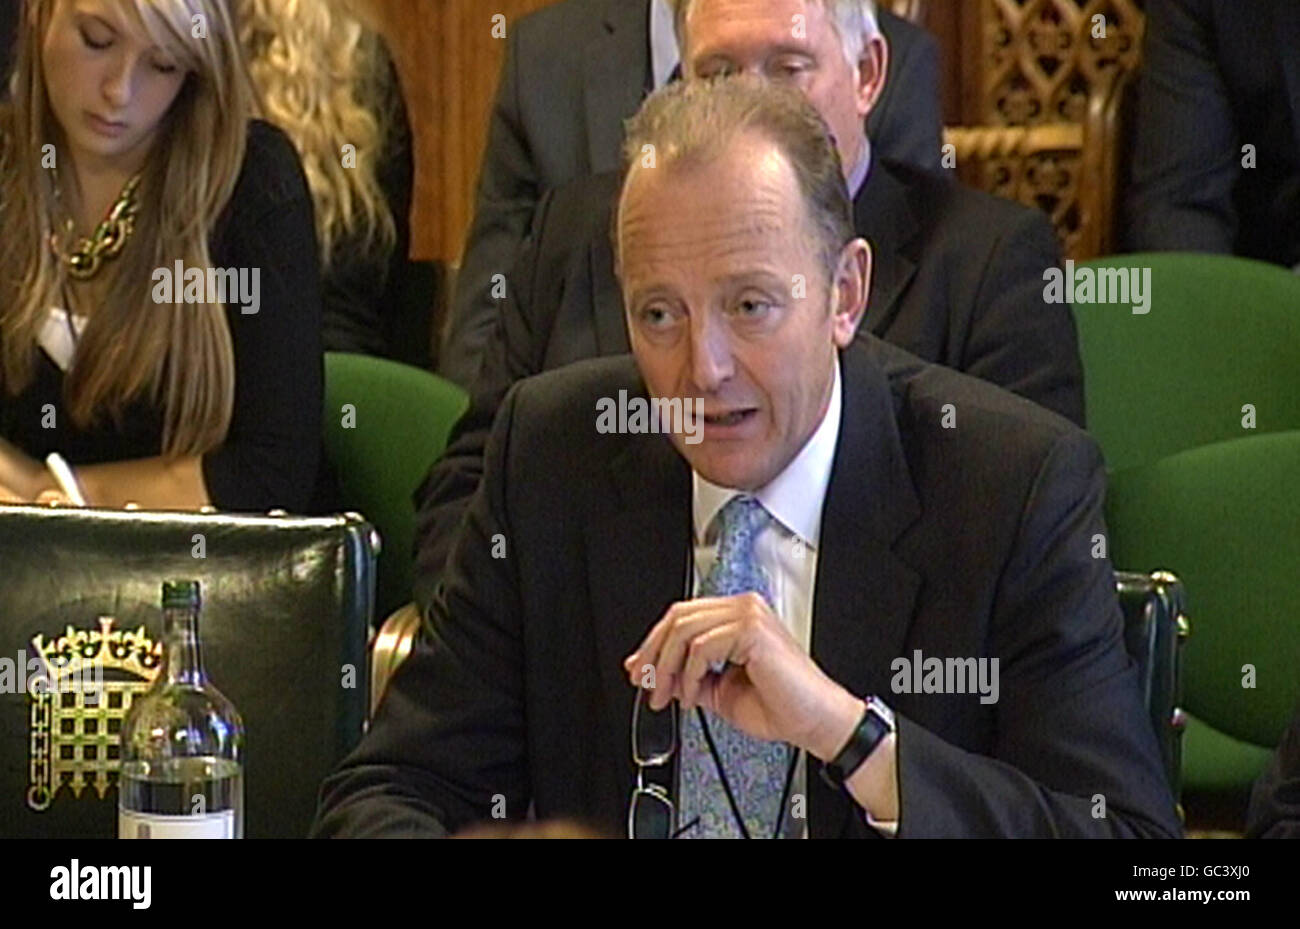 Sir Hugh Orde, President, Association of Chief Police Officers appearing at the Home Affairs Committee giving evidence on the Home Office's response to Terrorist Attacks, central London. Stock Photo